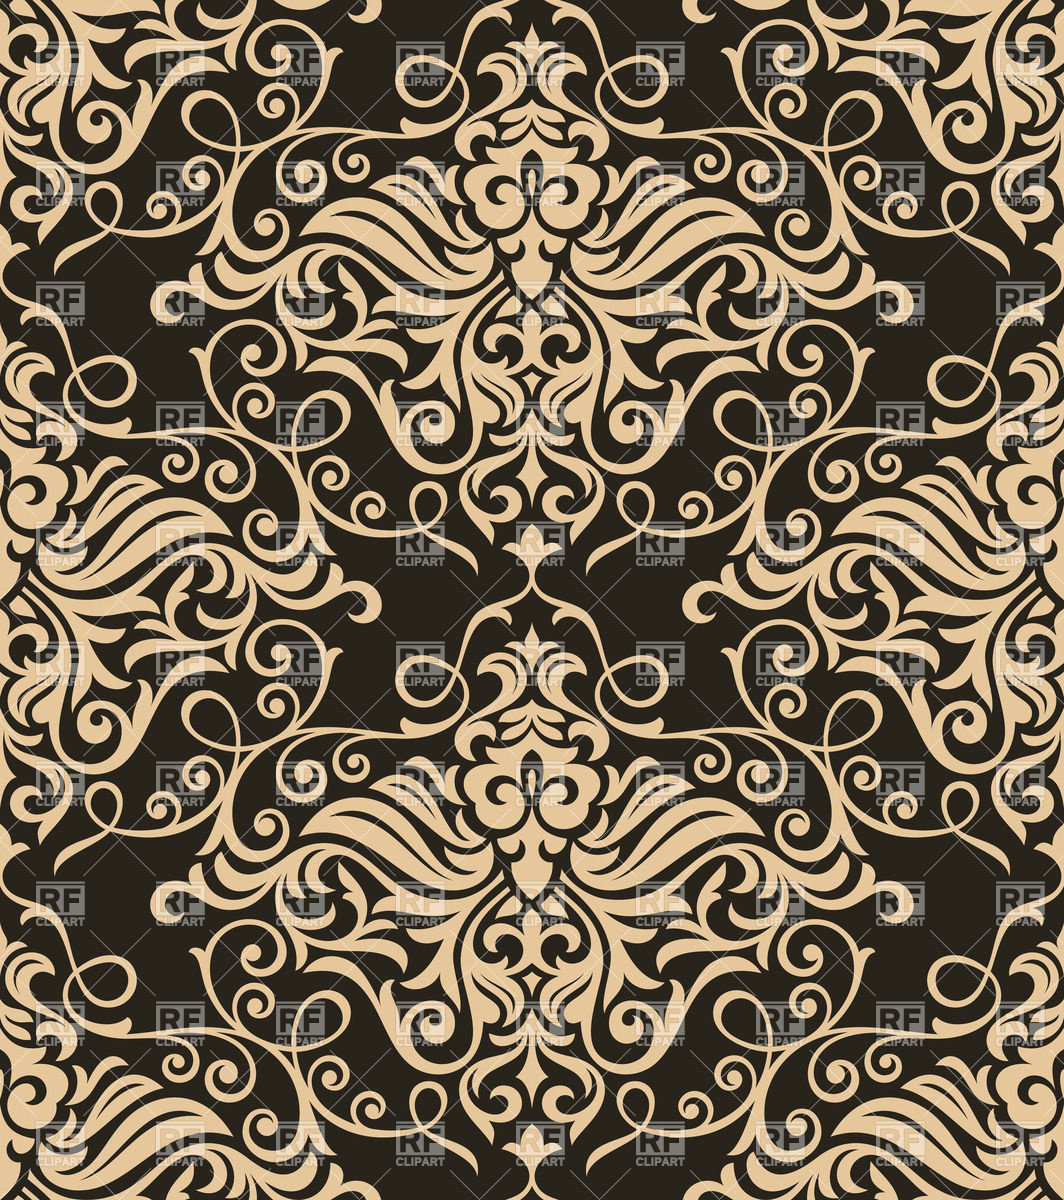 Free download Damask Clip Arts Free Downloads [1064x1200] for your ...